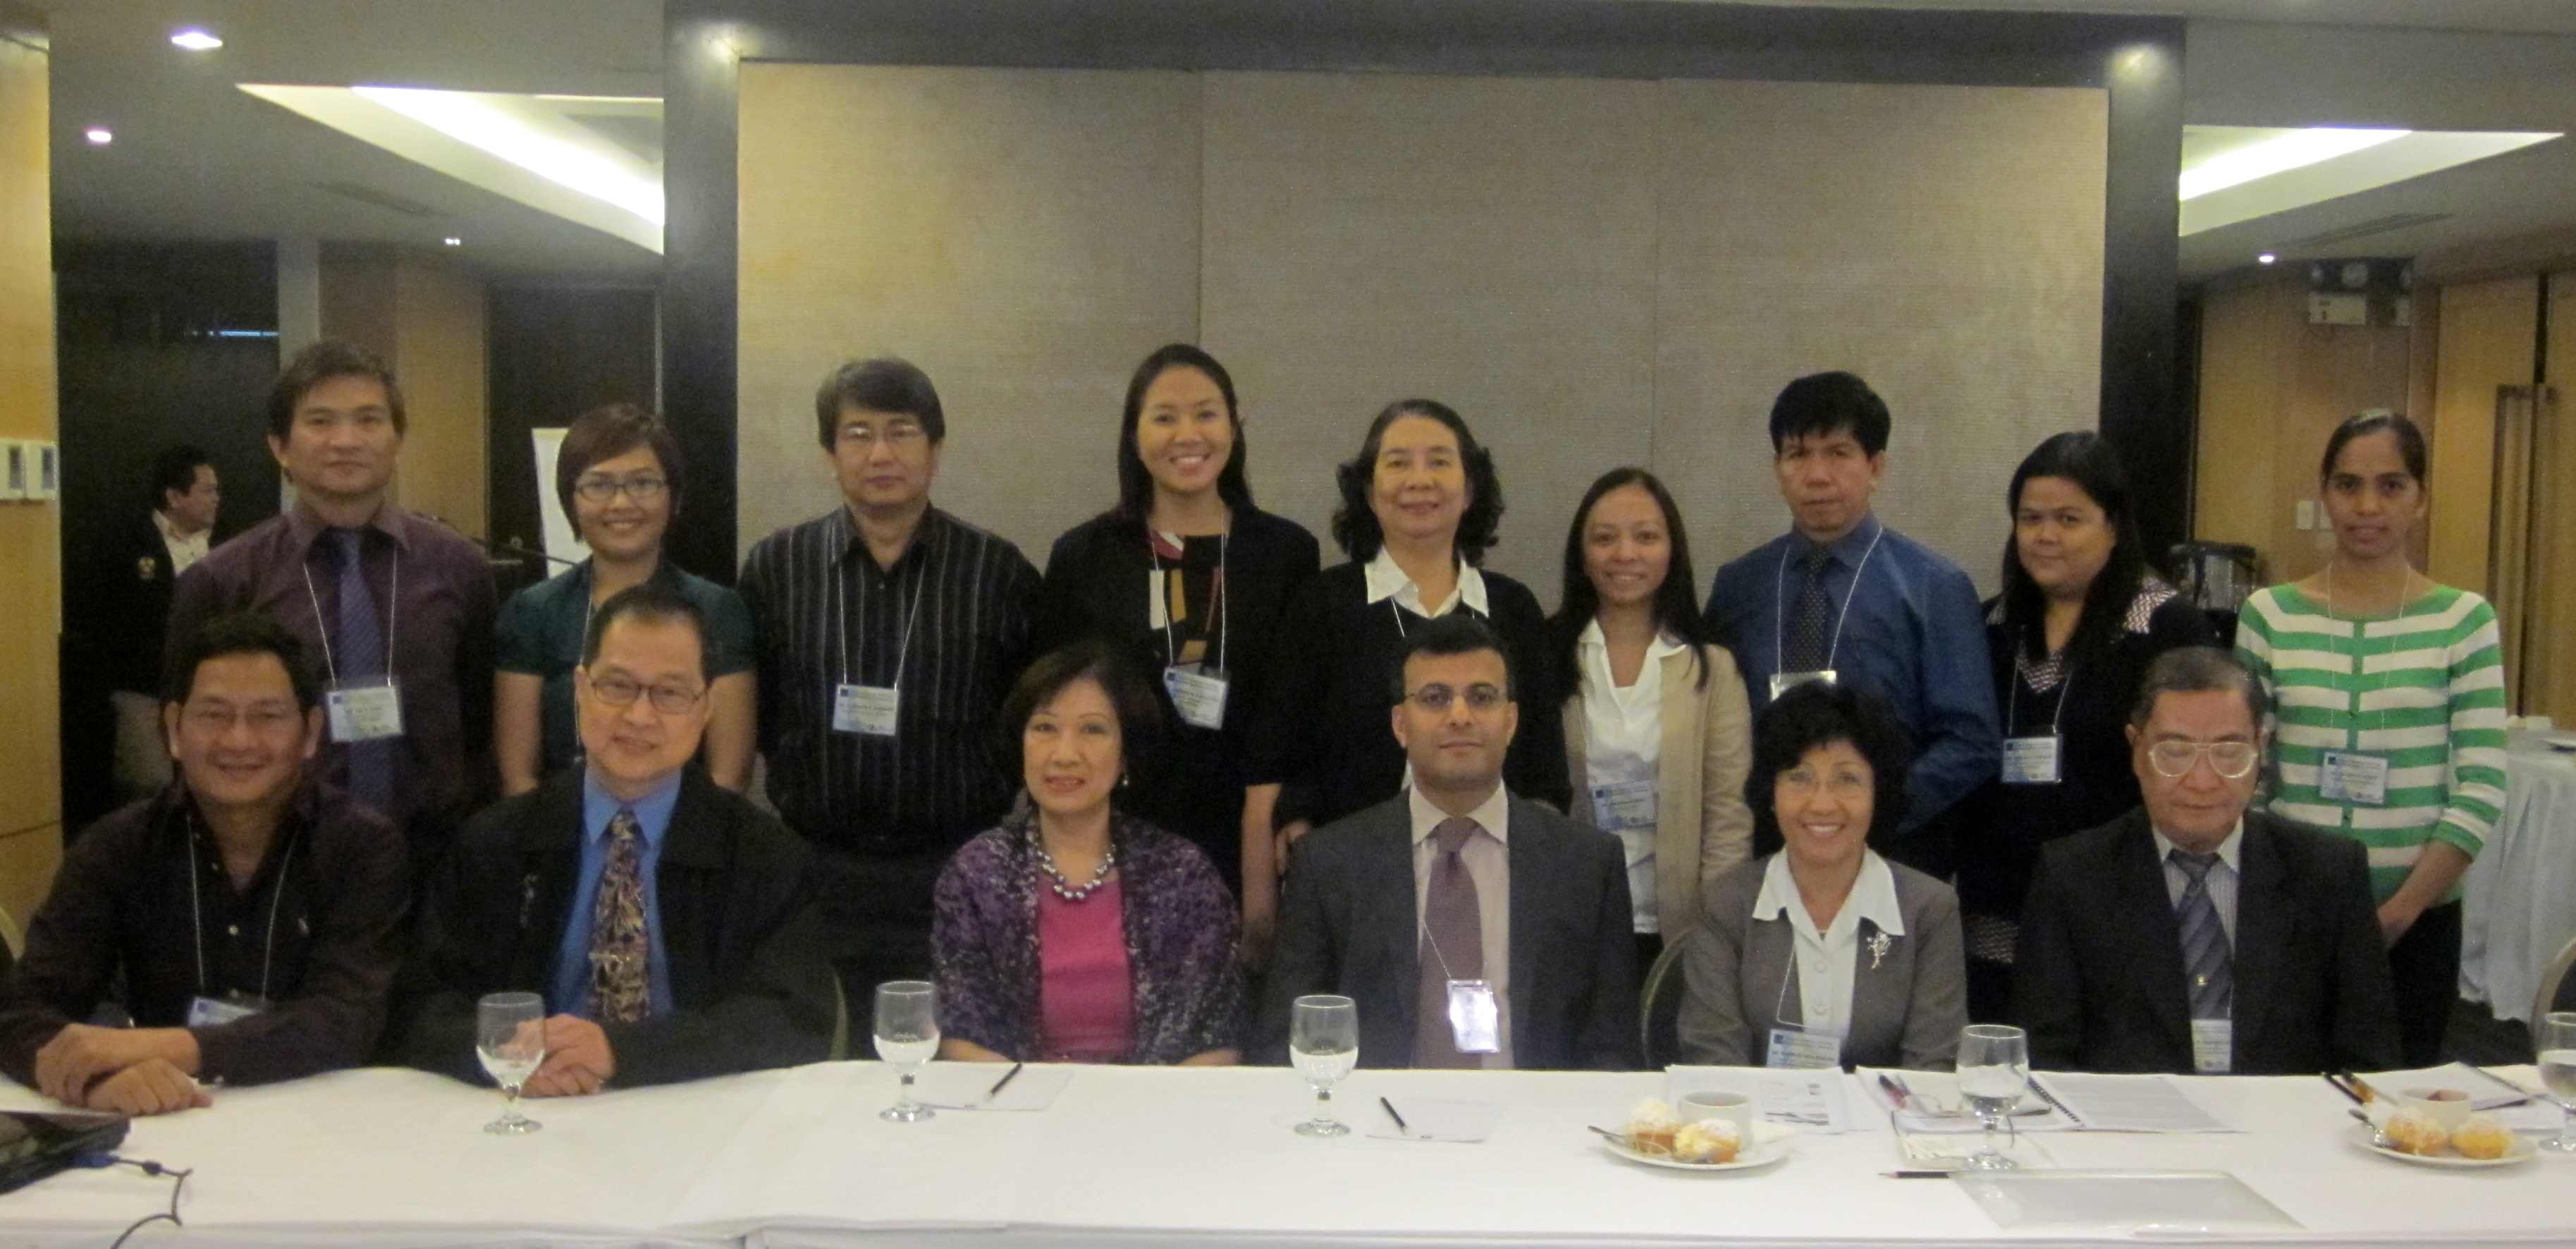 The Project Management Team with ADB, PRIMEX Staff, and Associates 